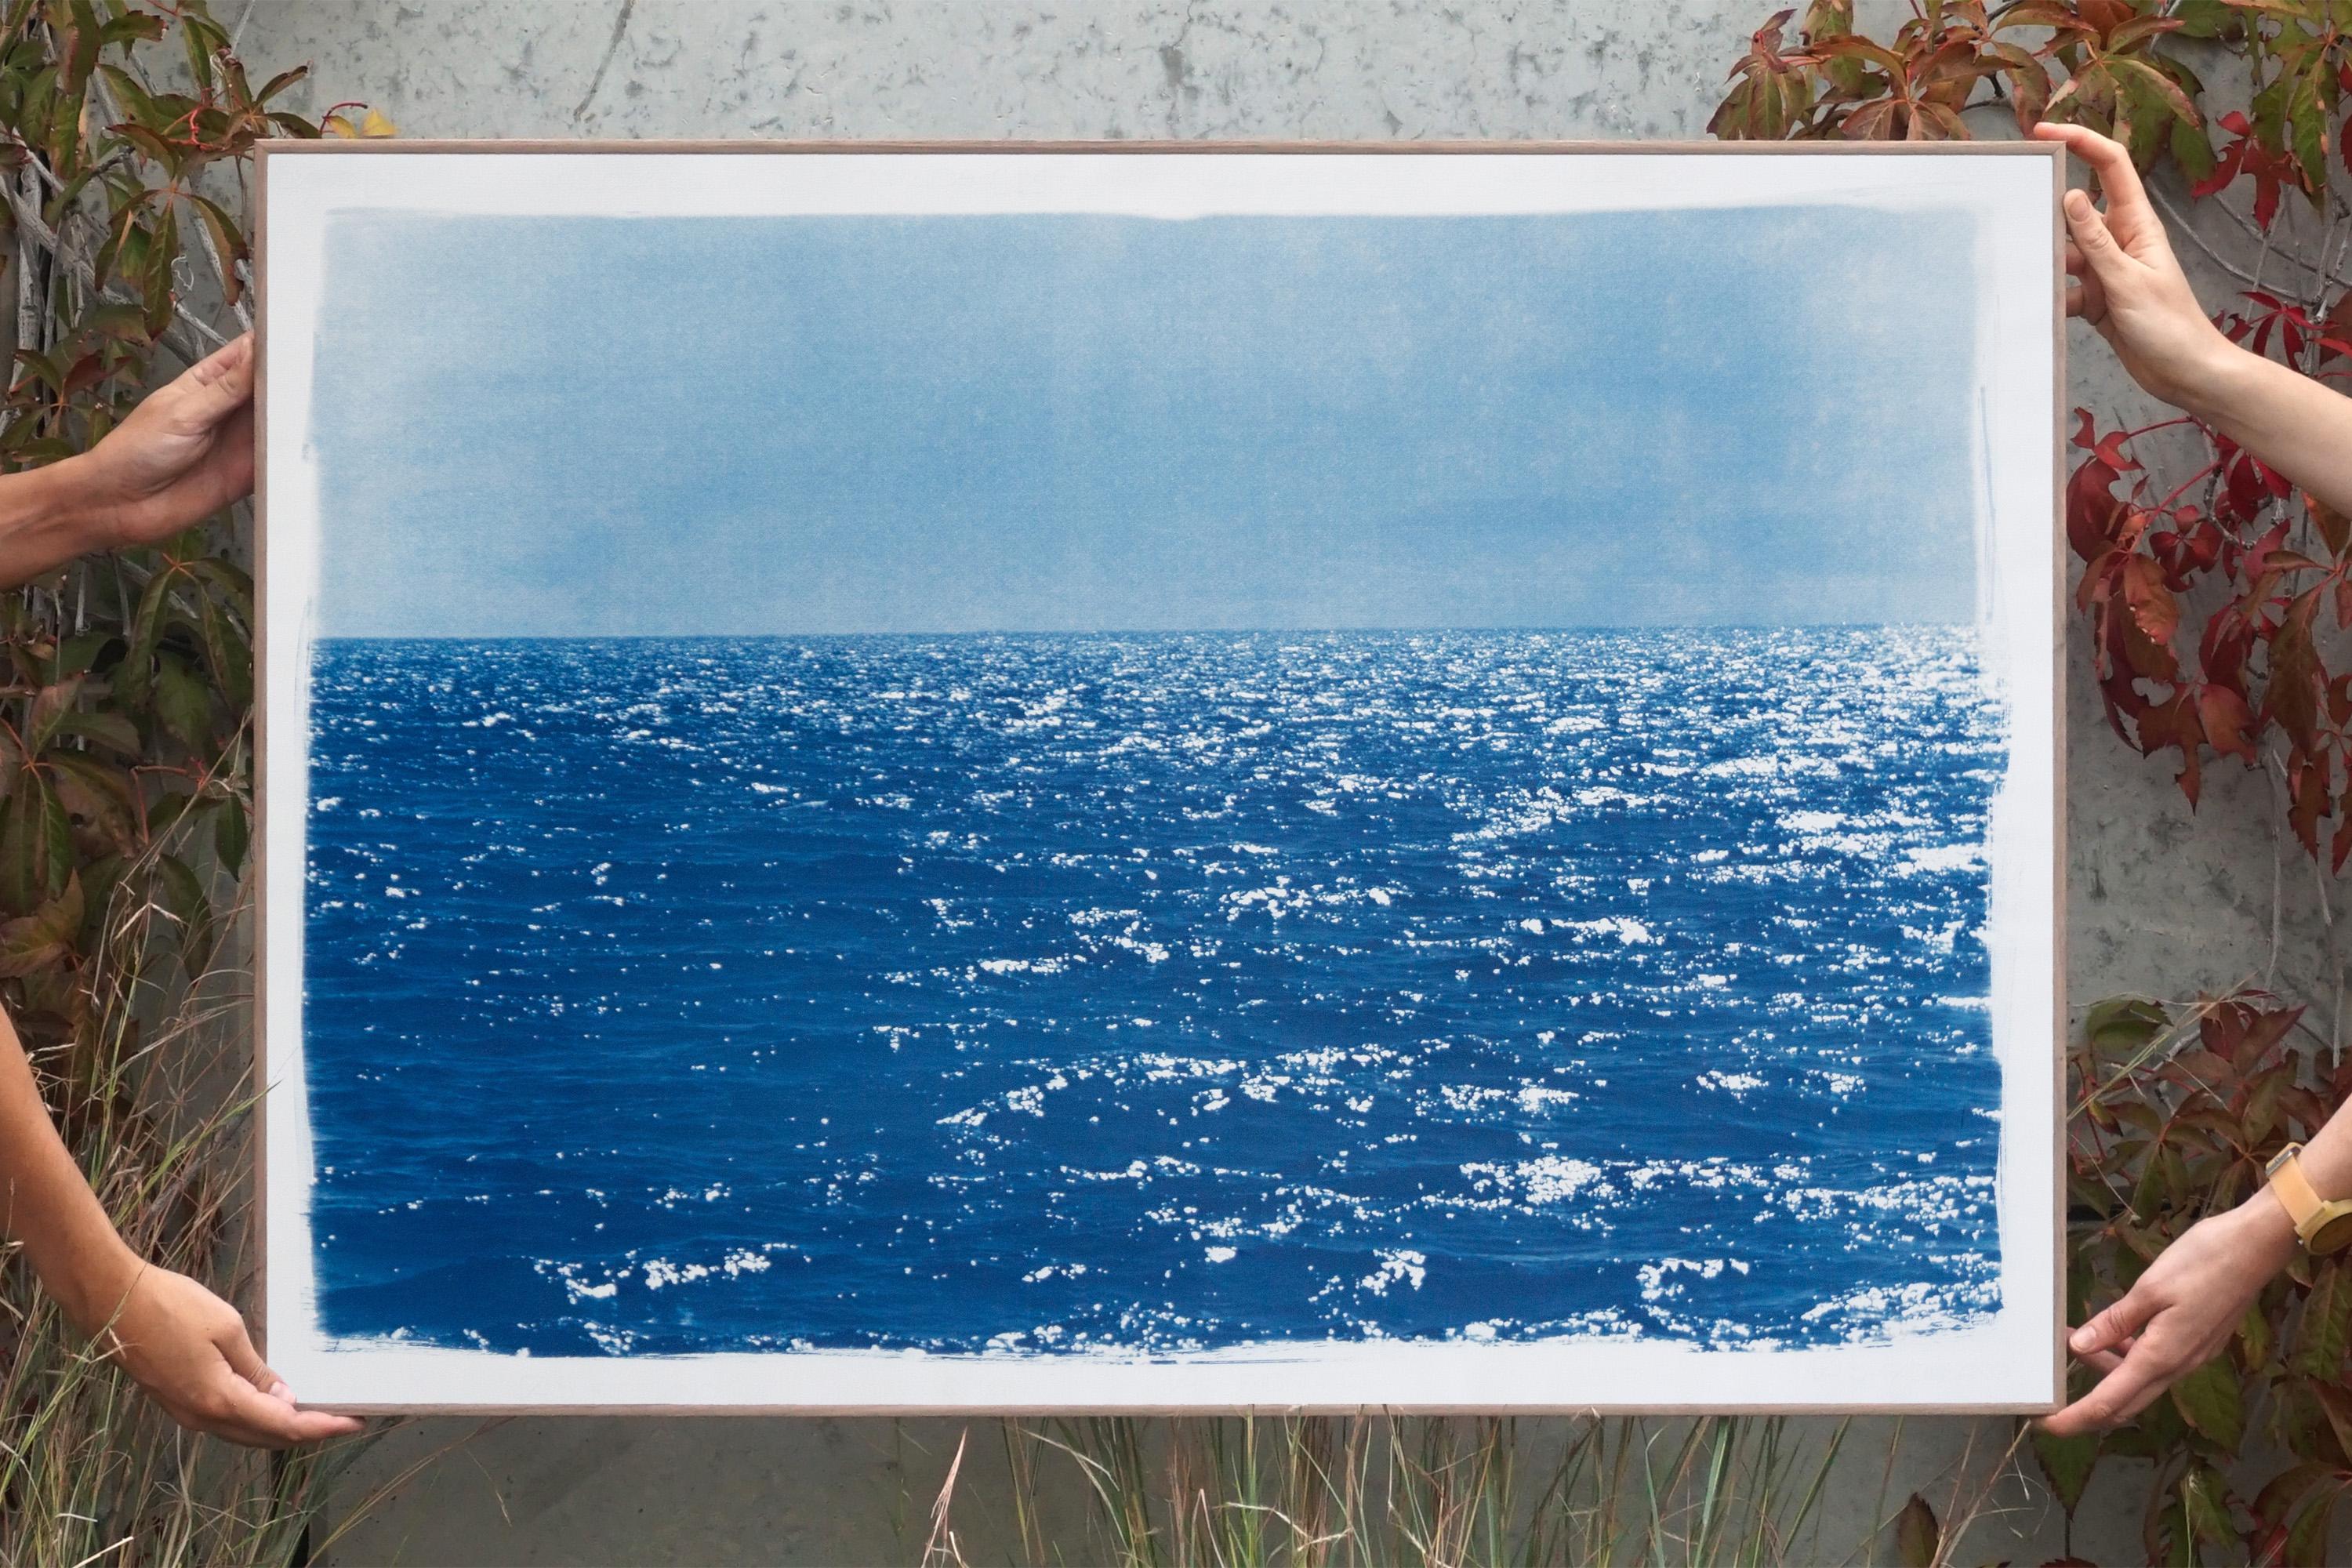 Coastal Blue Cyanotype of Day Time Seascape, Cold Waves, Nautical Painting Shore - Realist Print by Kind of Cyan